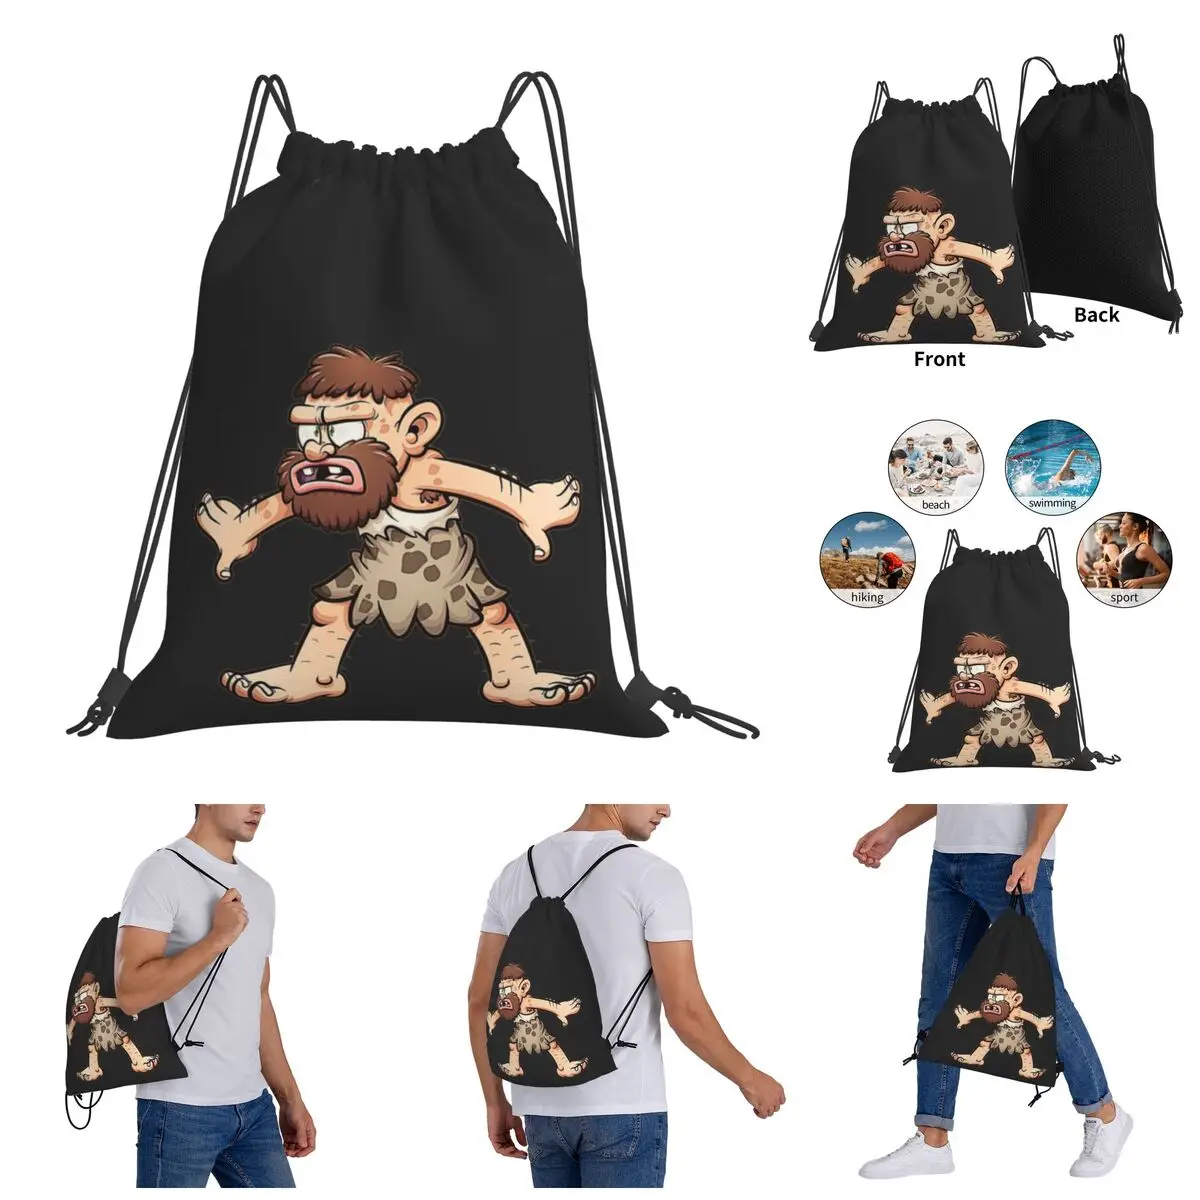 

Rucksack Confused Caveman Classic Funny Novelty Casual Graphic Drawstring Bags Gym Bag Backpack